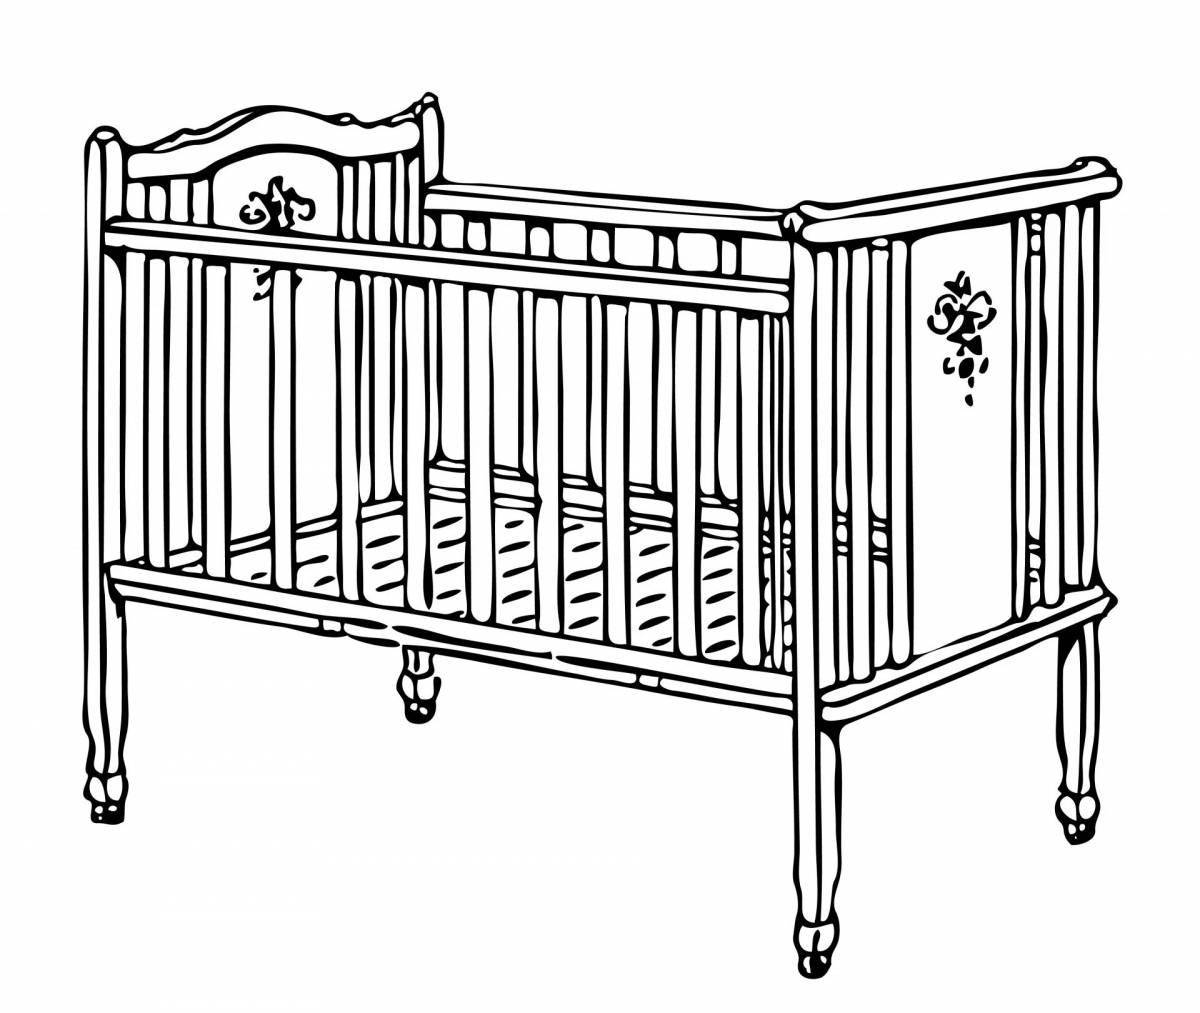 Coloring page of the amiable crib